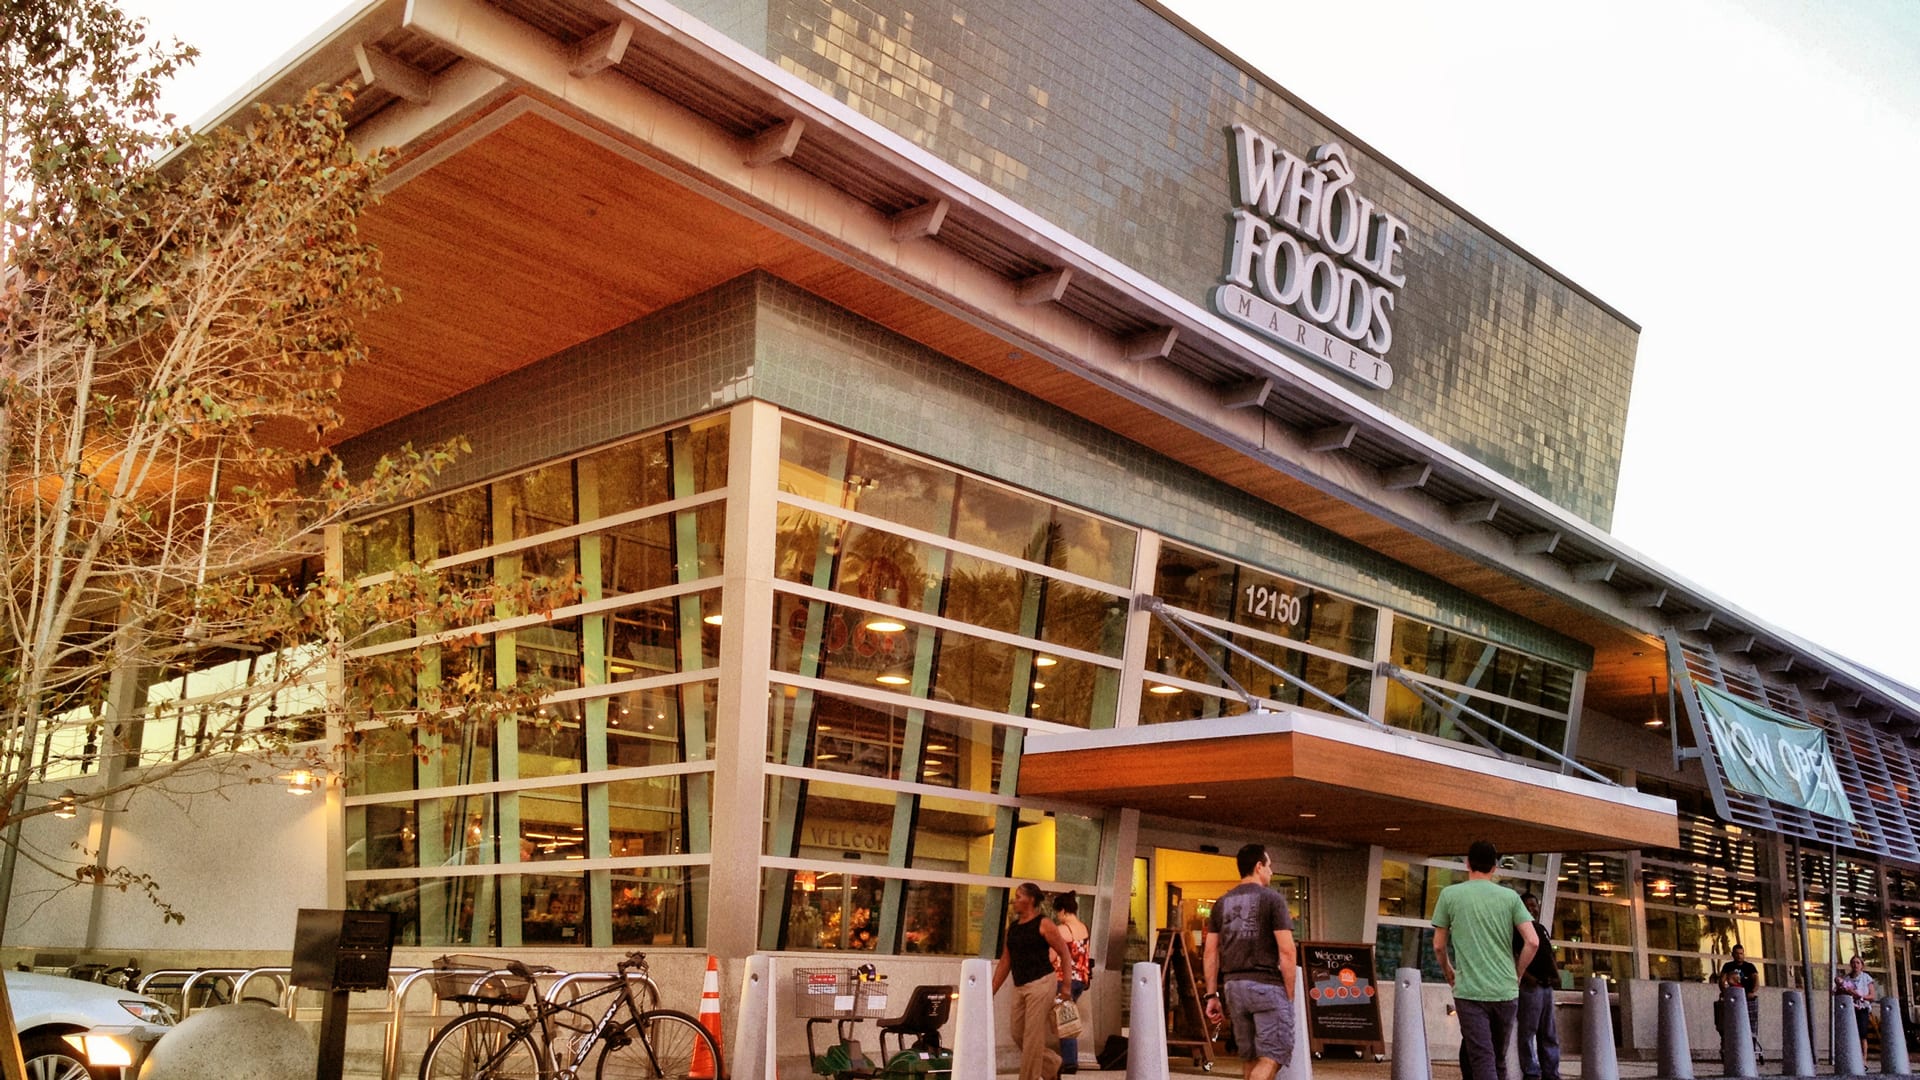 Vegans protesting Whole Foods may be the most Berkeley thing ever